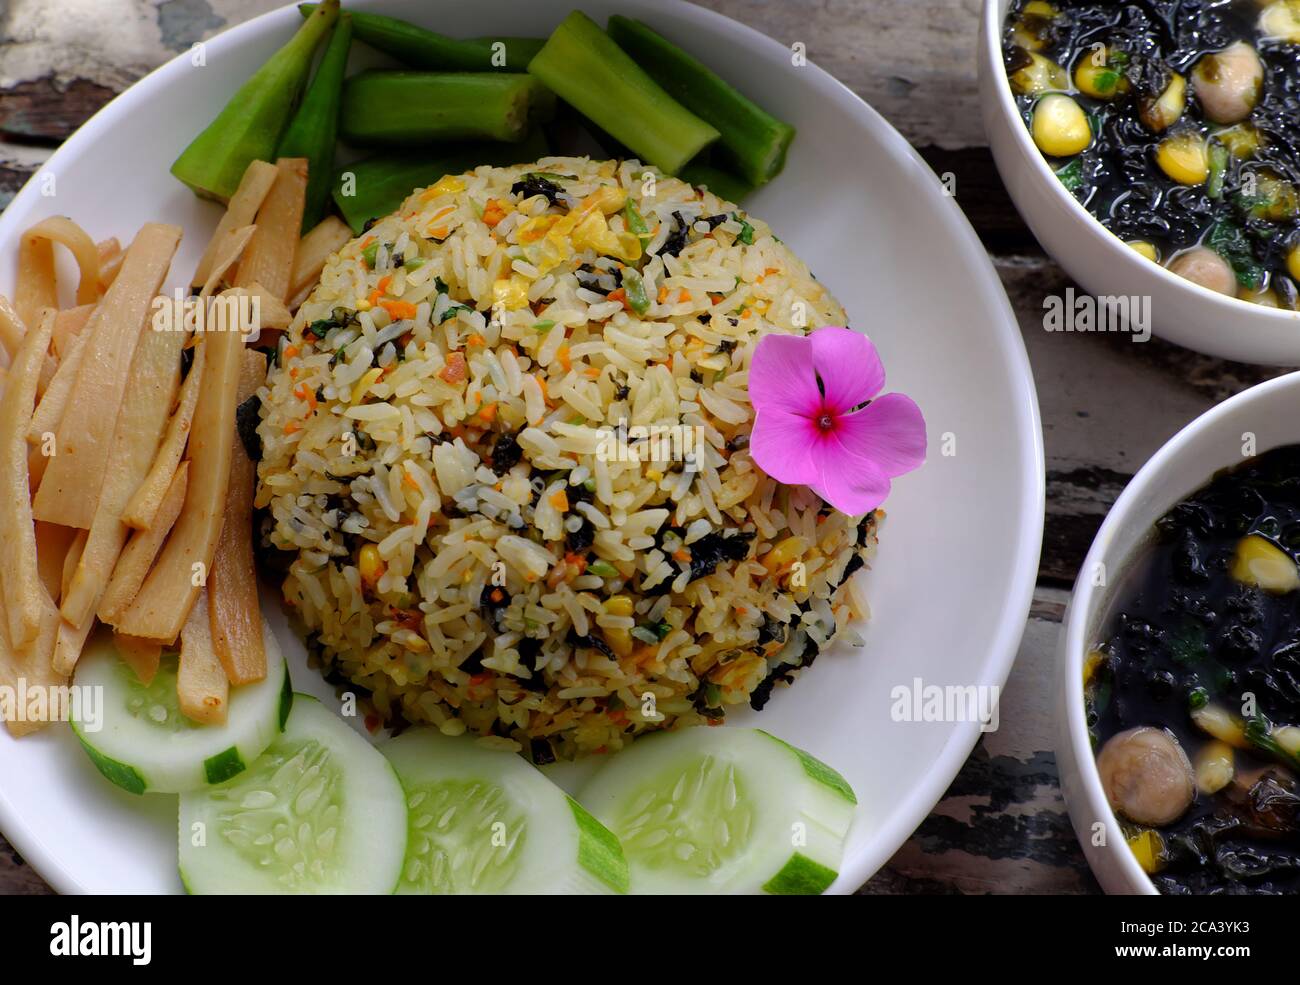 plate of fried rice dish with vegetables, cucumber, bamboo shoot, okra and seaweed soup for family meal lunch, delicious vegan food ready to eat Stock Photo